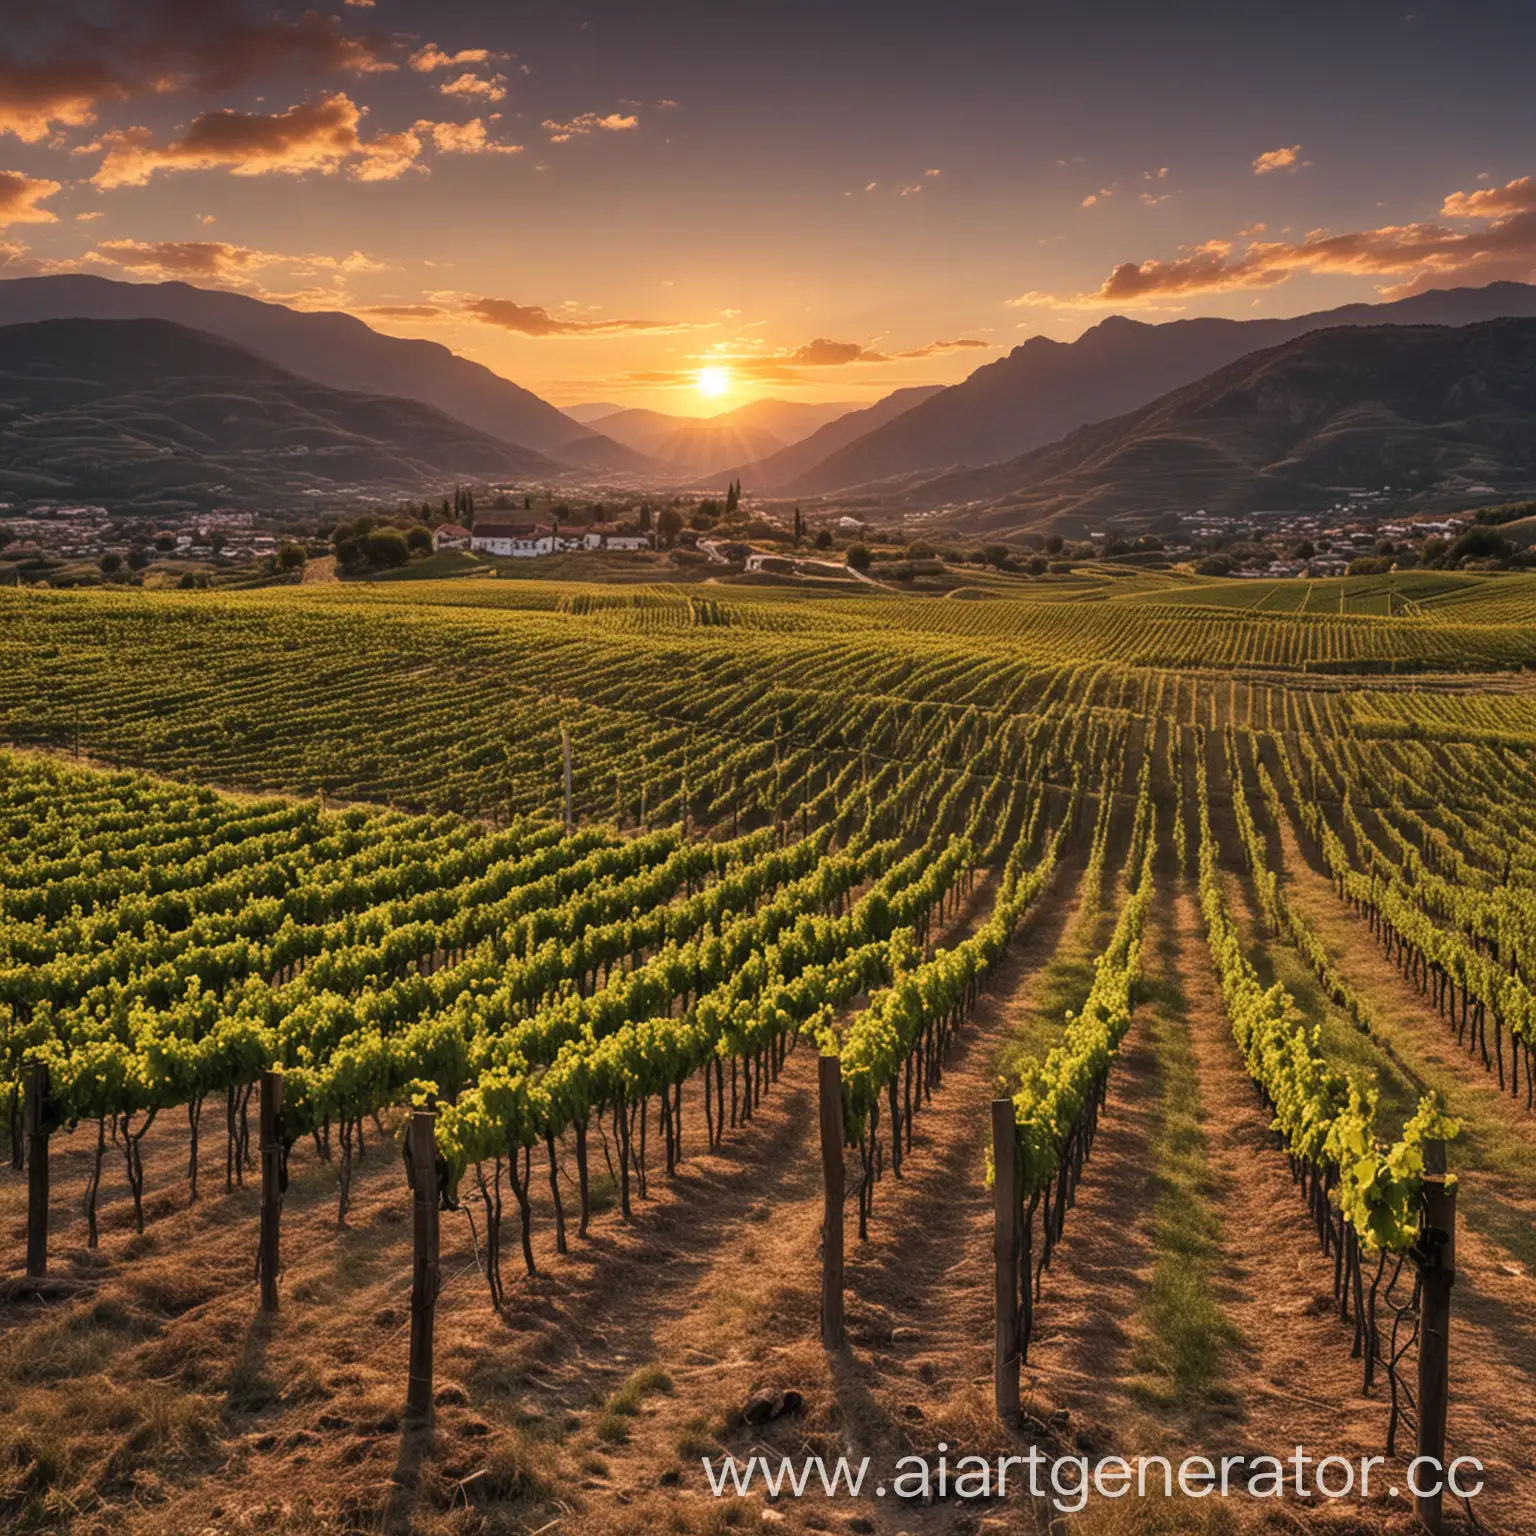 Vineyard-Sunset-Landscape-with-Mountains